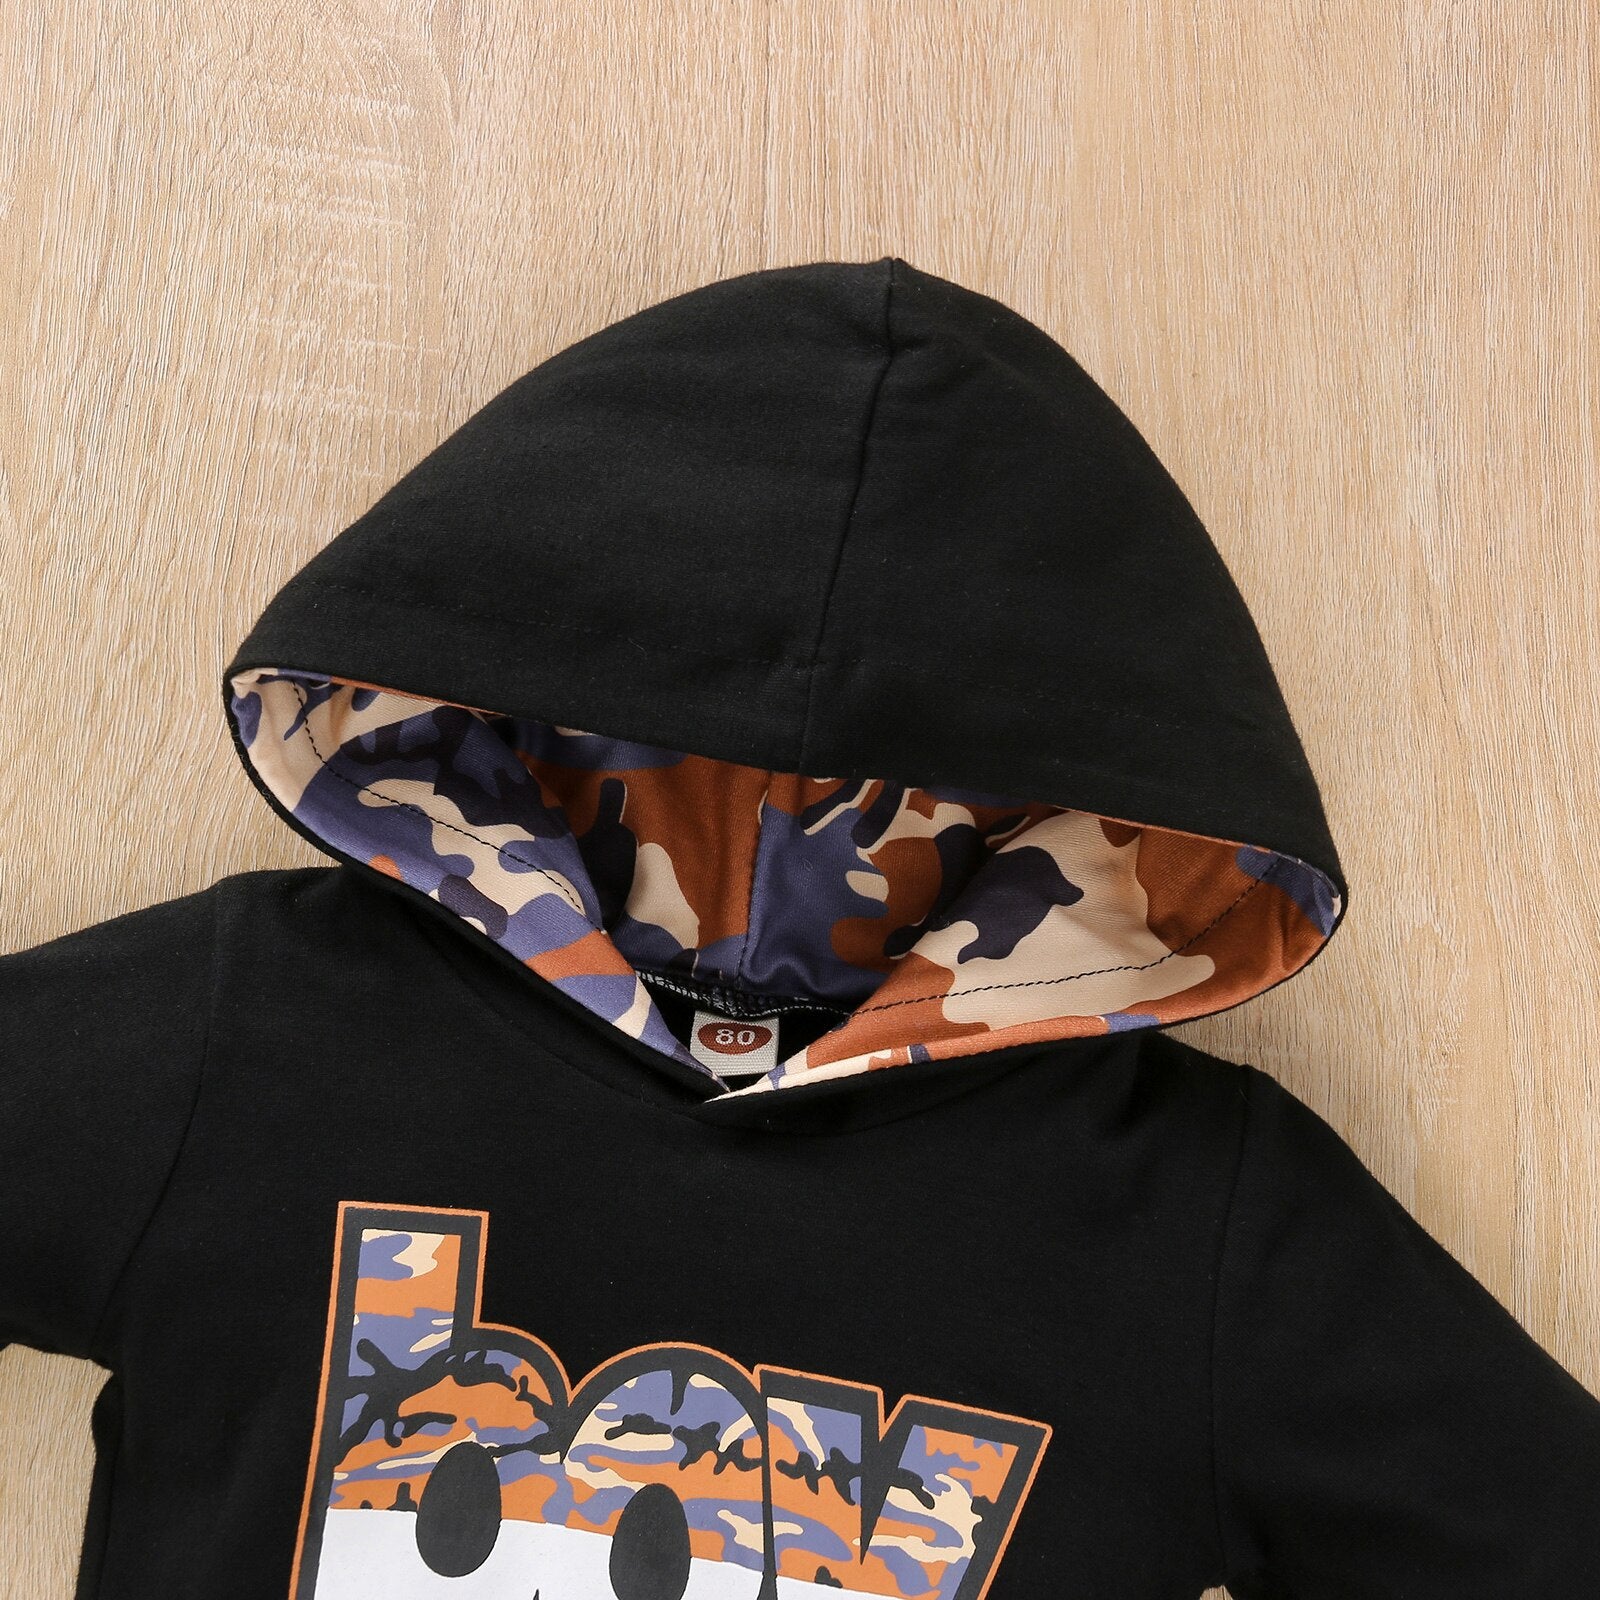 Boy Style Hoodie with Camouflage Pants